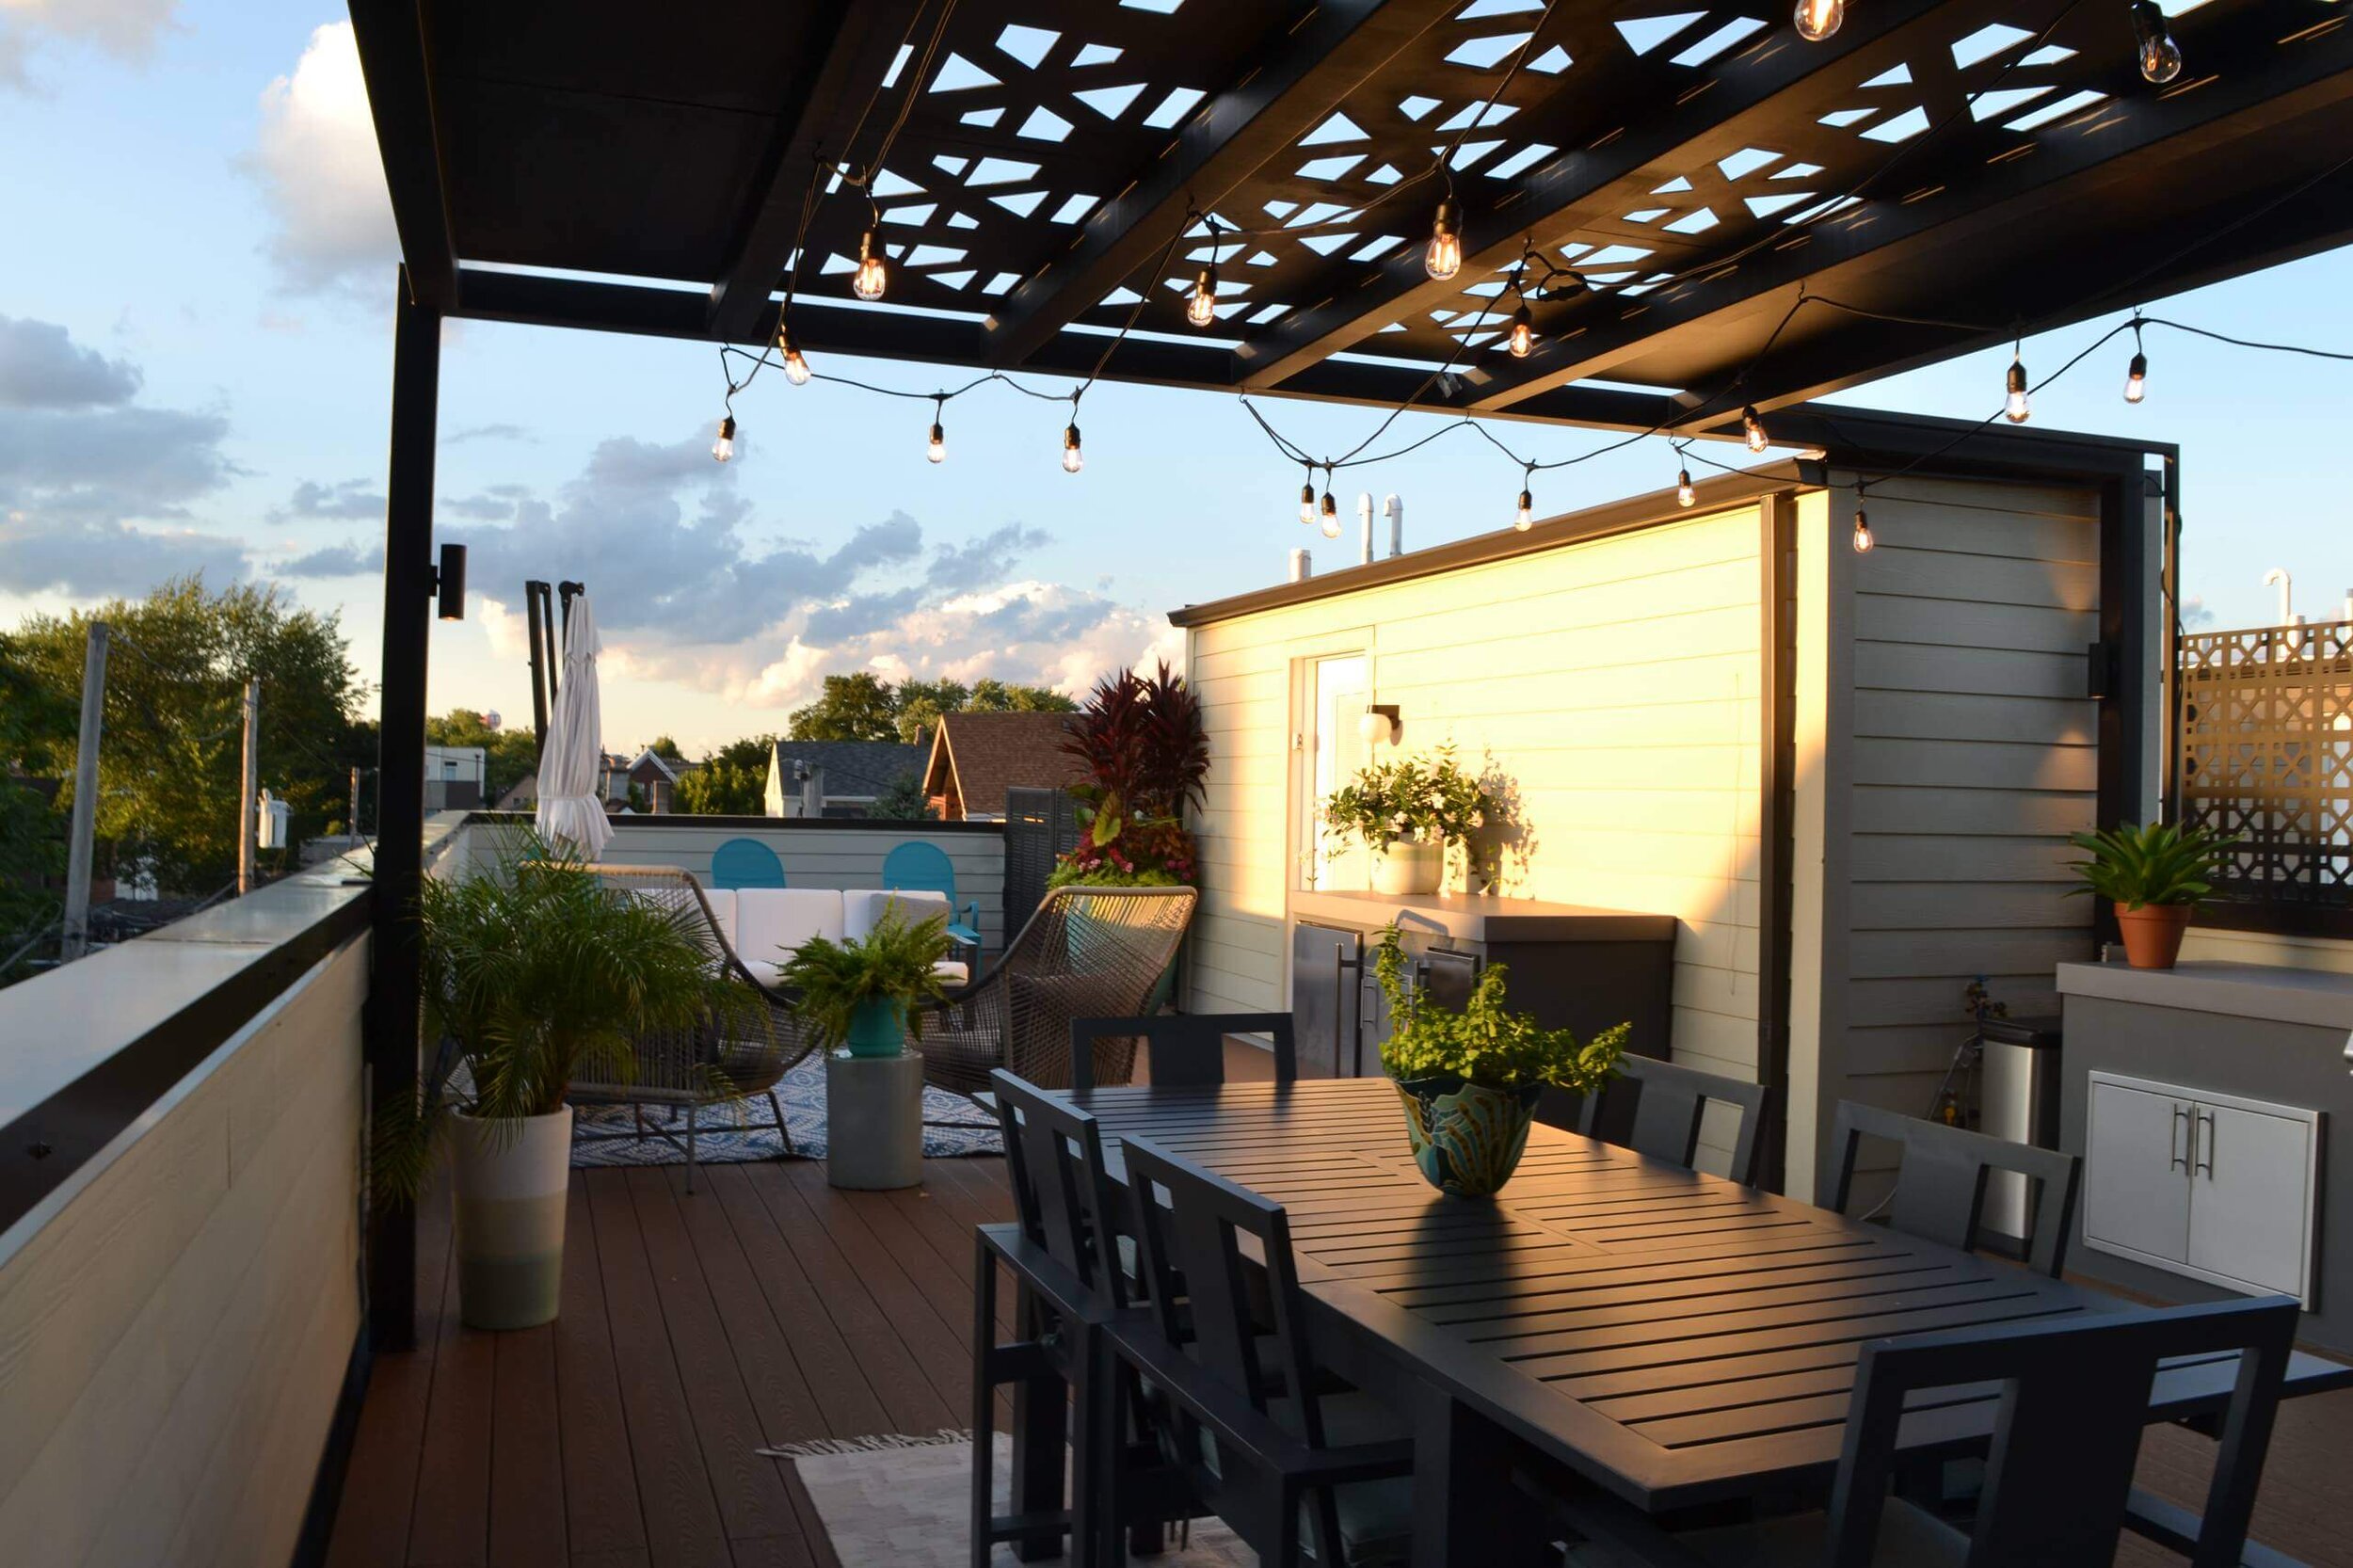 Rooftop Deck Design, Build, and Construction in Bucktown, Chicago